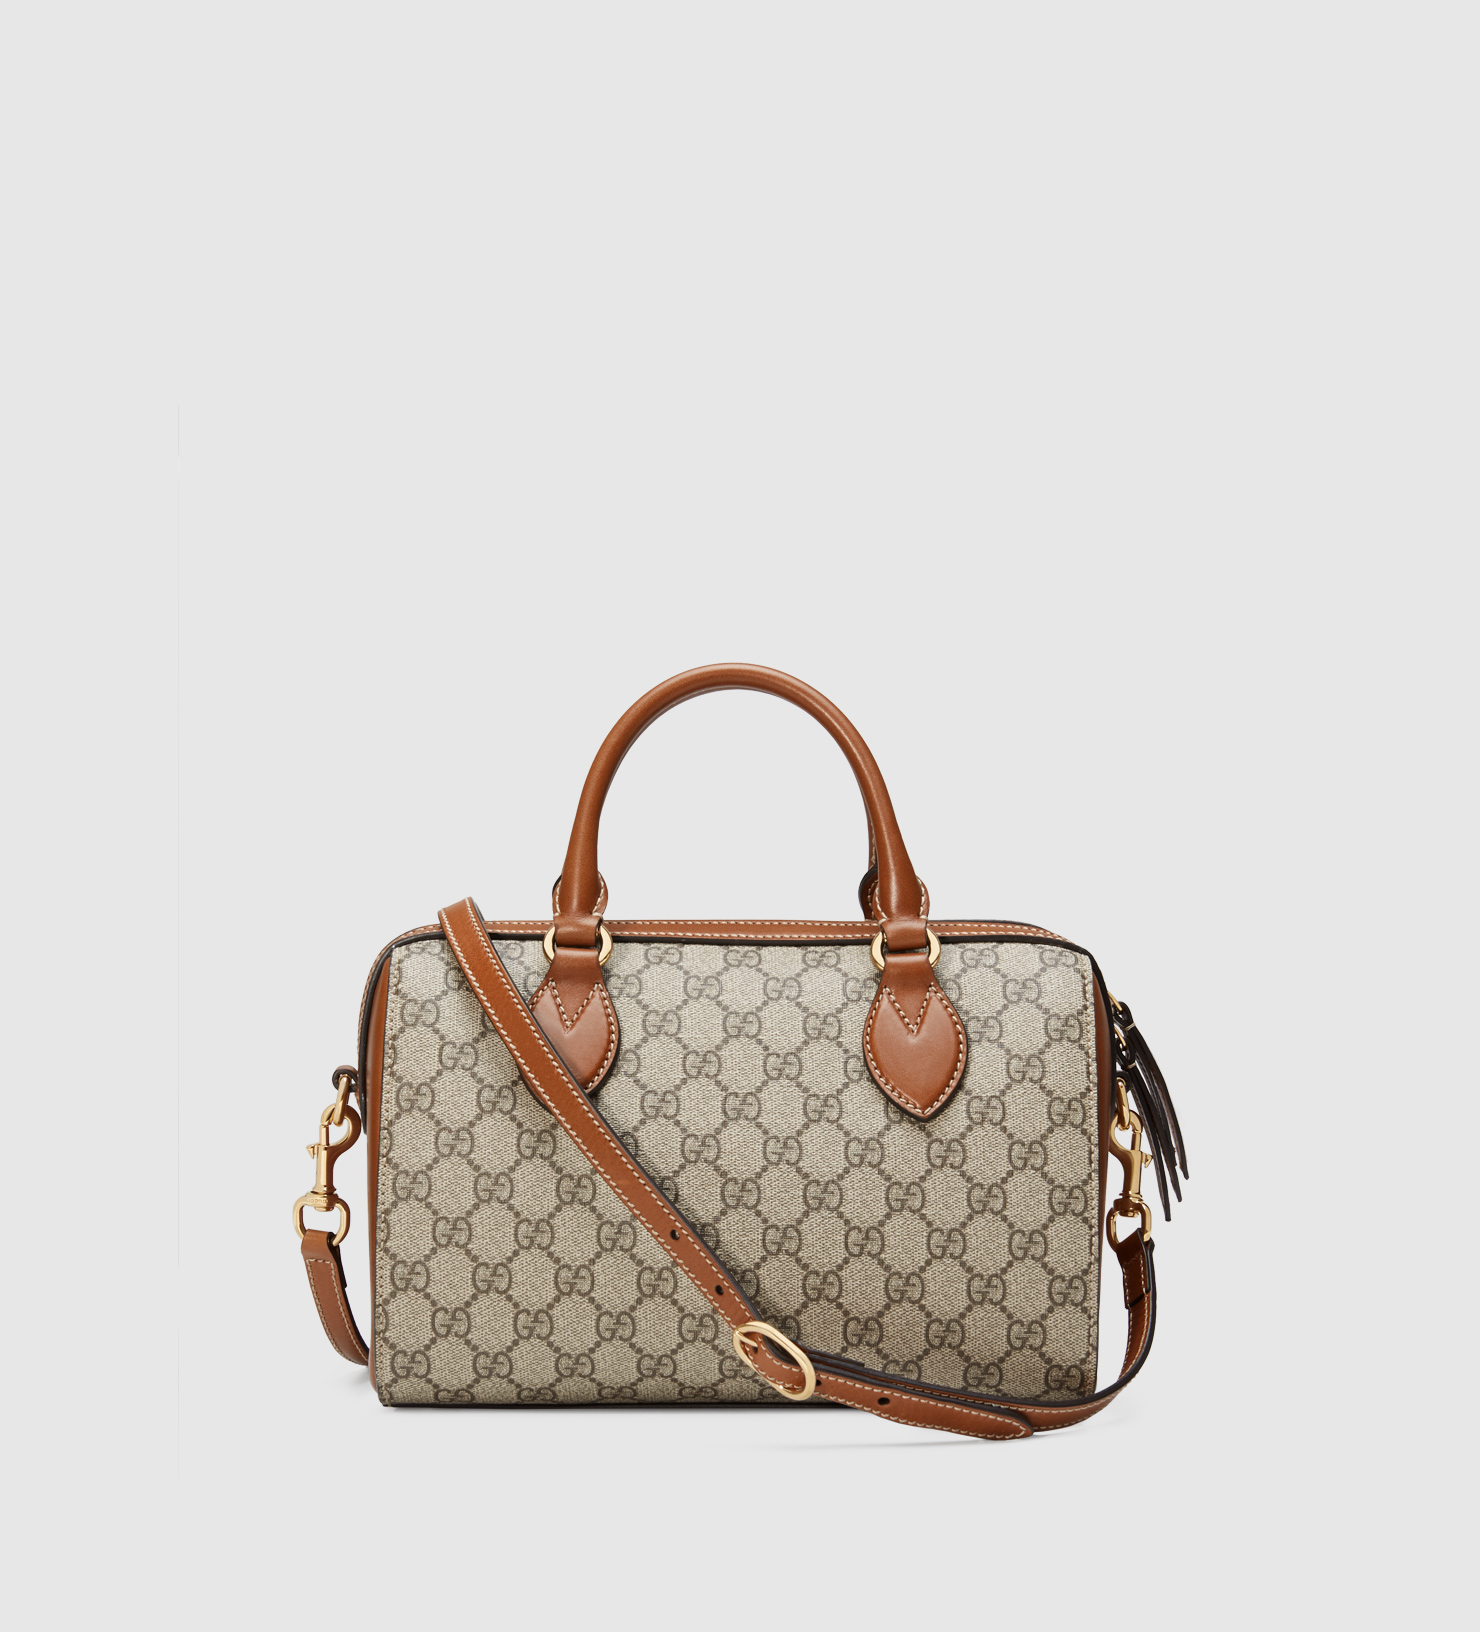 Gucci Canvas Gg Supreme Top Handle Bag in Brown - Lyst